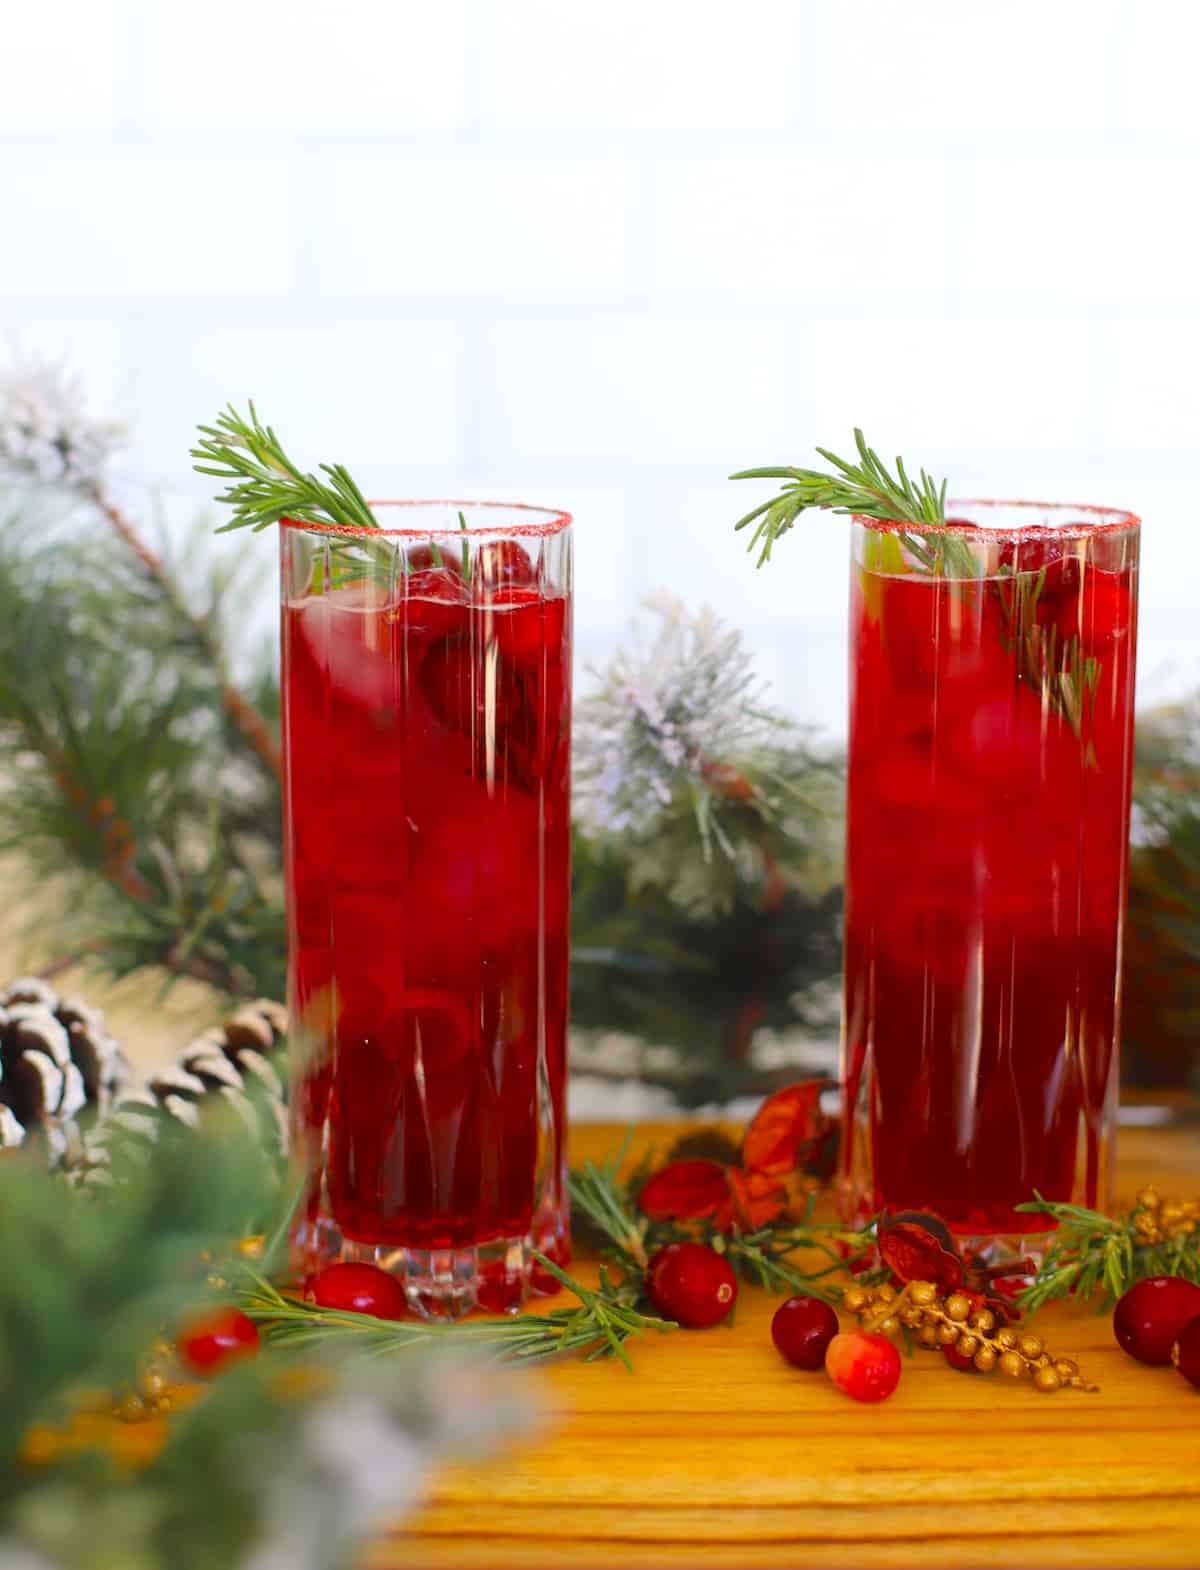 Tall glasses filled with cranberry juice and fresh berries and rosemary with holiday decor.